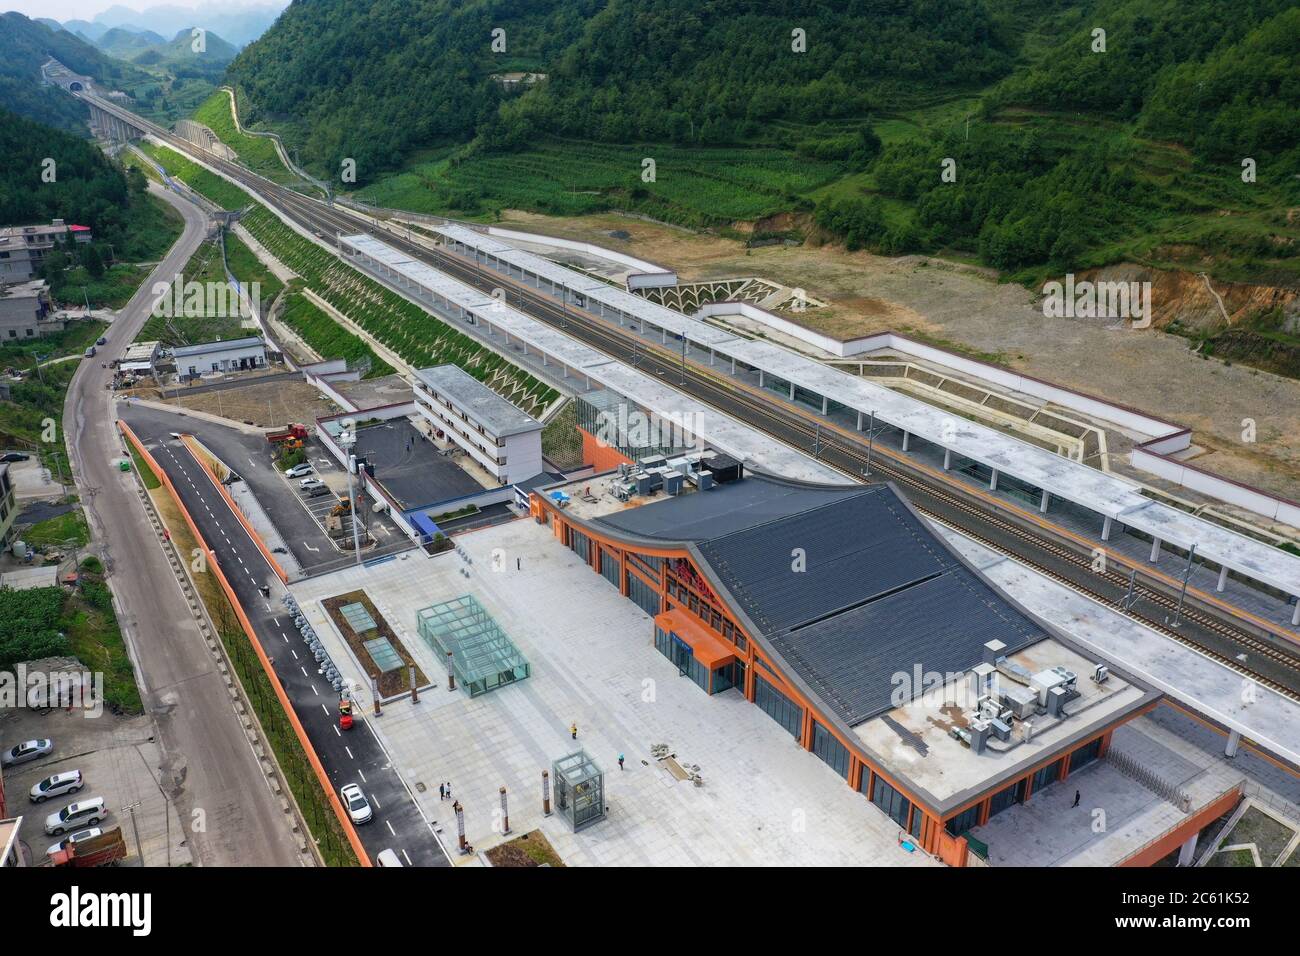 Liupanshui. 6th July, 2020. Aerial photo taken on July 6, 2020 shows Lengba Railway Station along the Anshun-Liupanshui railway in southwest China's Guizhou Province. The Anshun-Liupanshui intercity railway, with a designed speed of 250 km per hour, is being prepared for opening. The railway will shorten the travel time between Guiyang and Liupanshui from the current 3.5 hours to about 1 hour, and Liupanshui City will be fully connected with the national high-speed rail network. Credit: Liu Xu/Xinhua/Alamy Live News Stock Photo